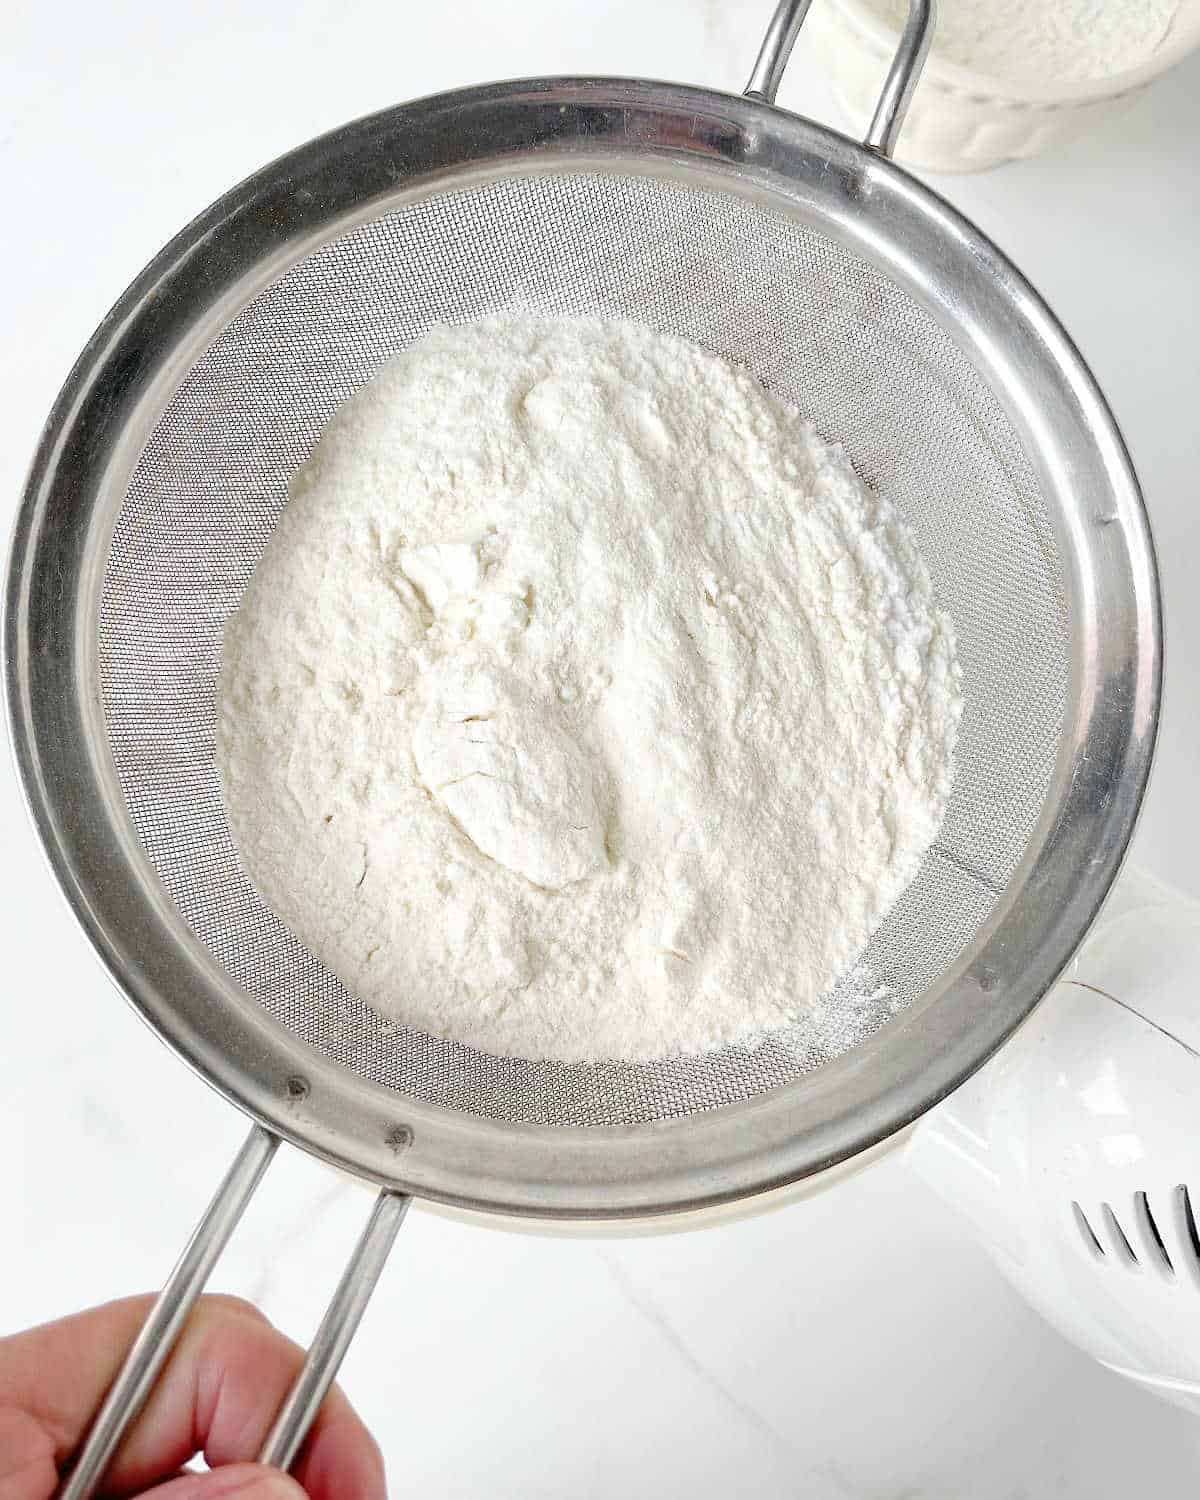 Sifting flour on top of cake batter. White surface.